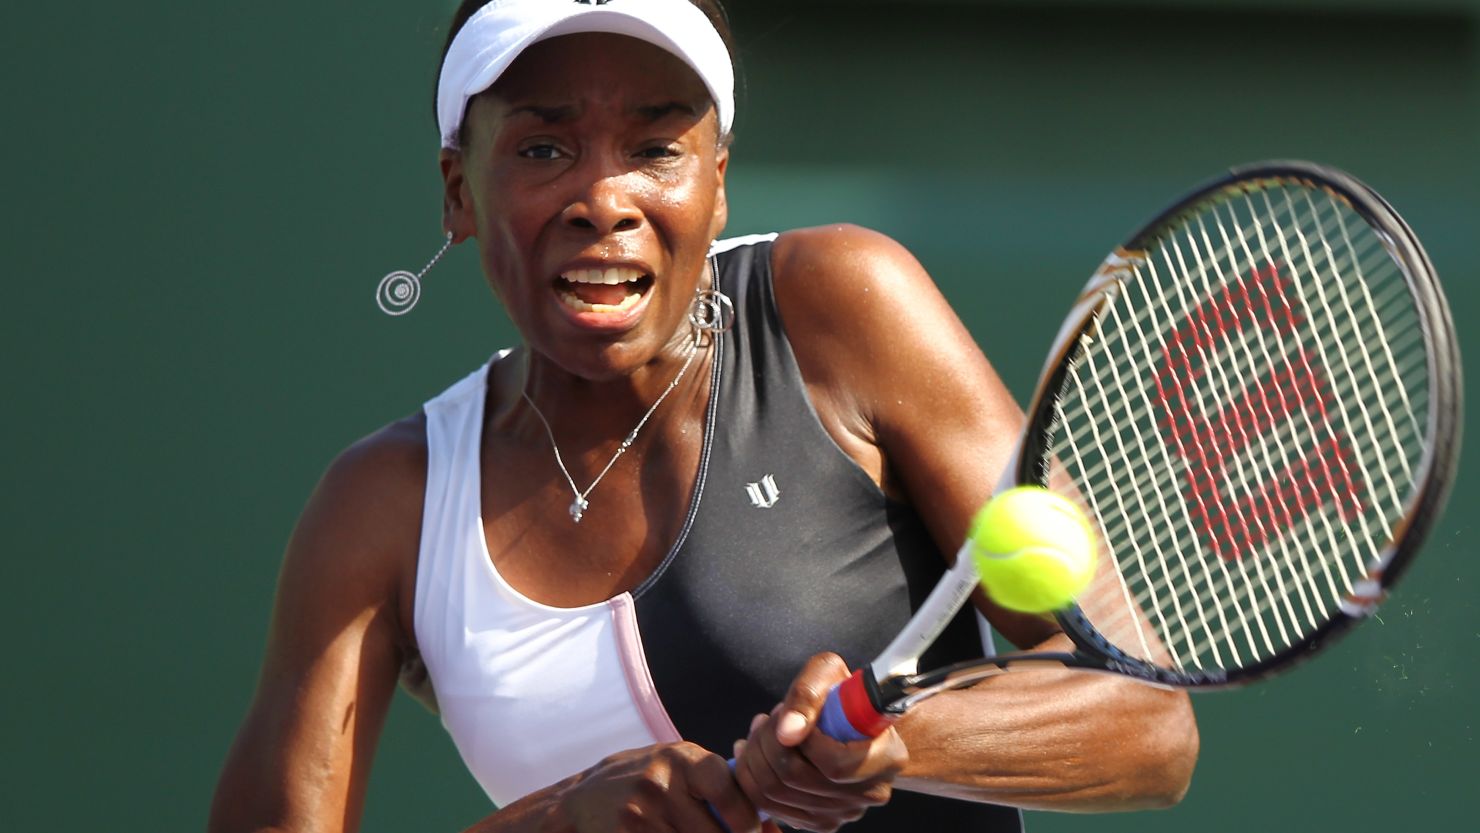 Venus Williams has been out of tennis for over six months after being diagnosed with Sjogren's syndrome